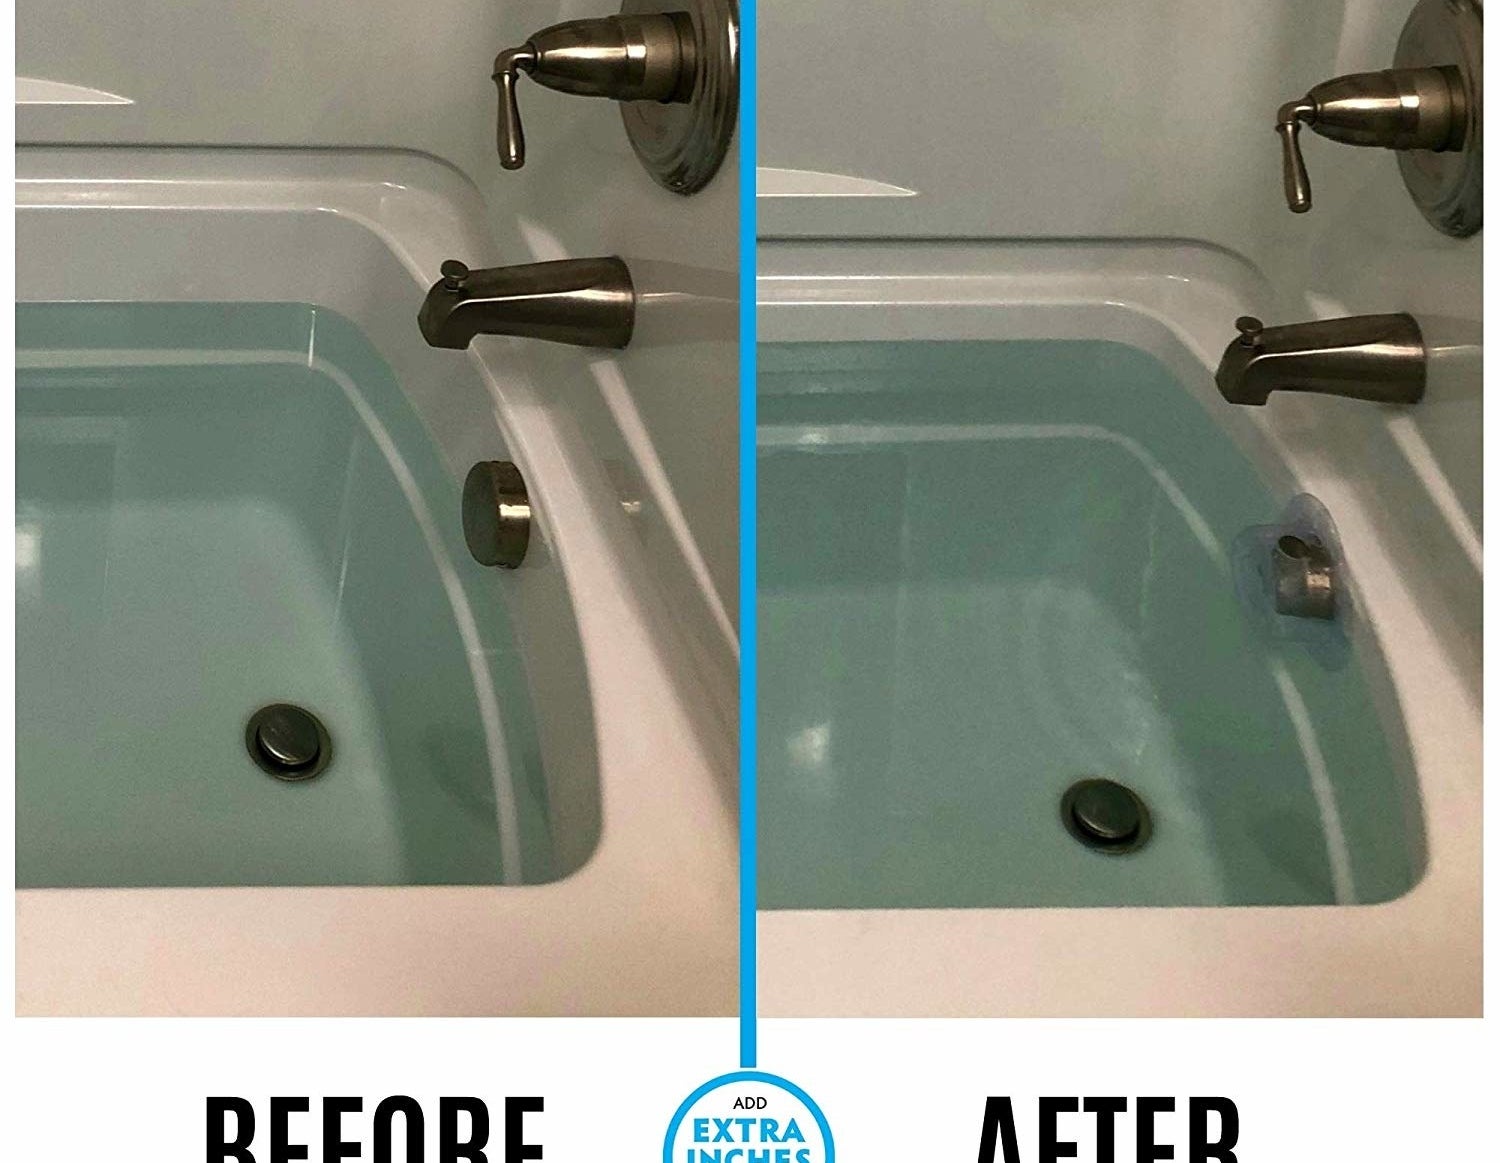 A before and after of a bathtub filled as far as it can be filled without the cover and then with the cover which is about 3-4 inches higher 